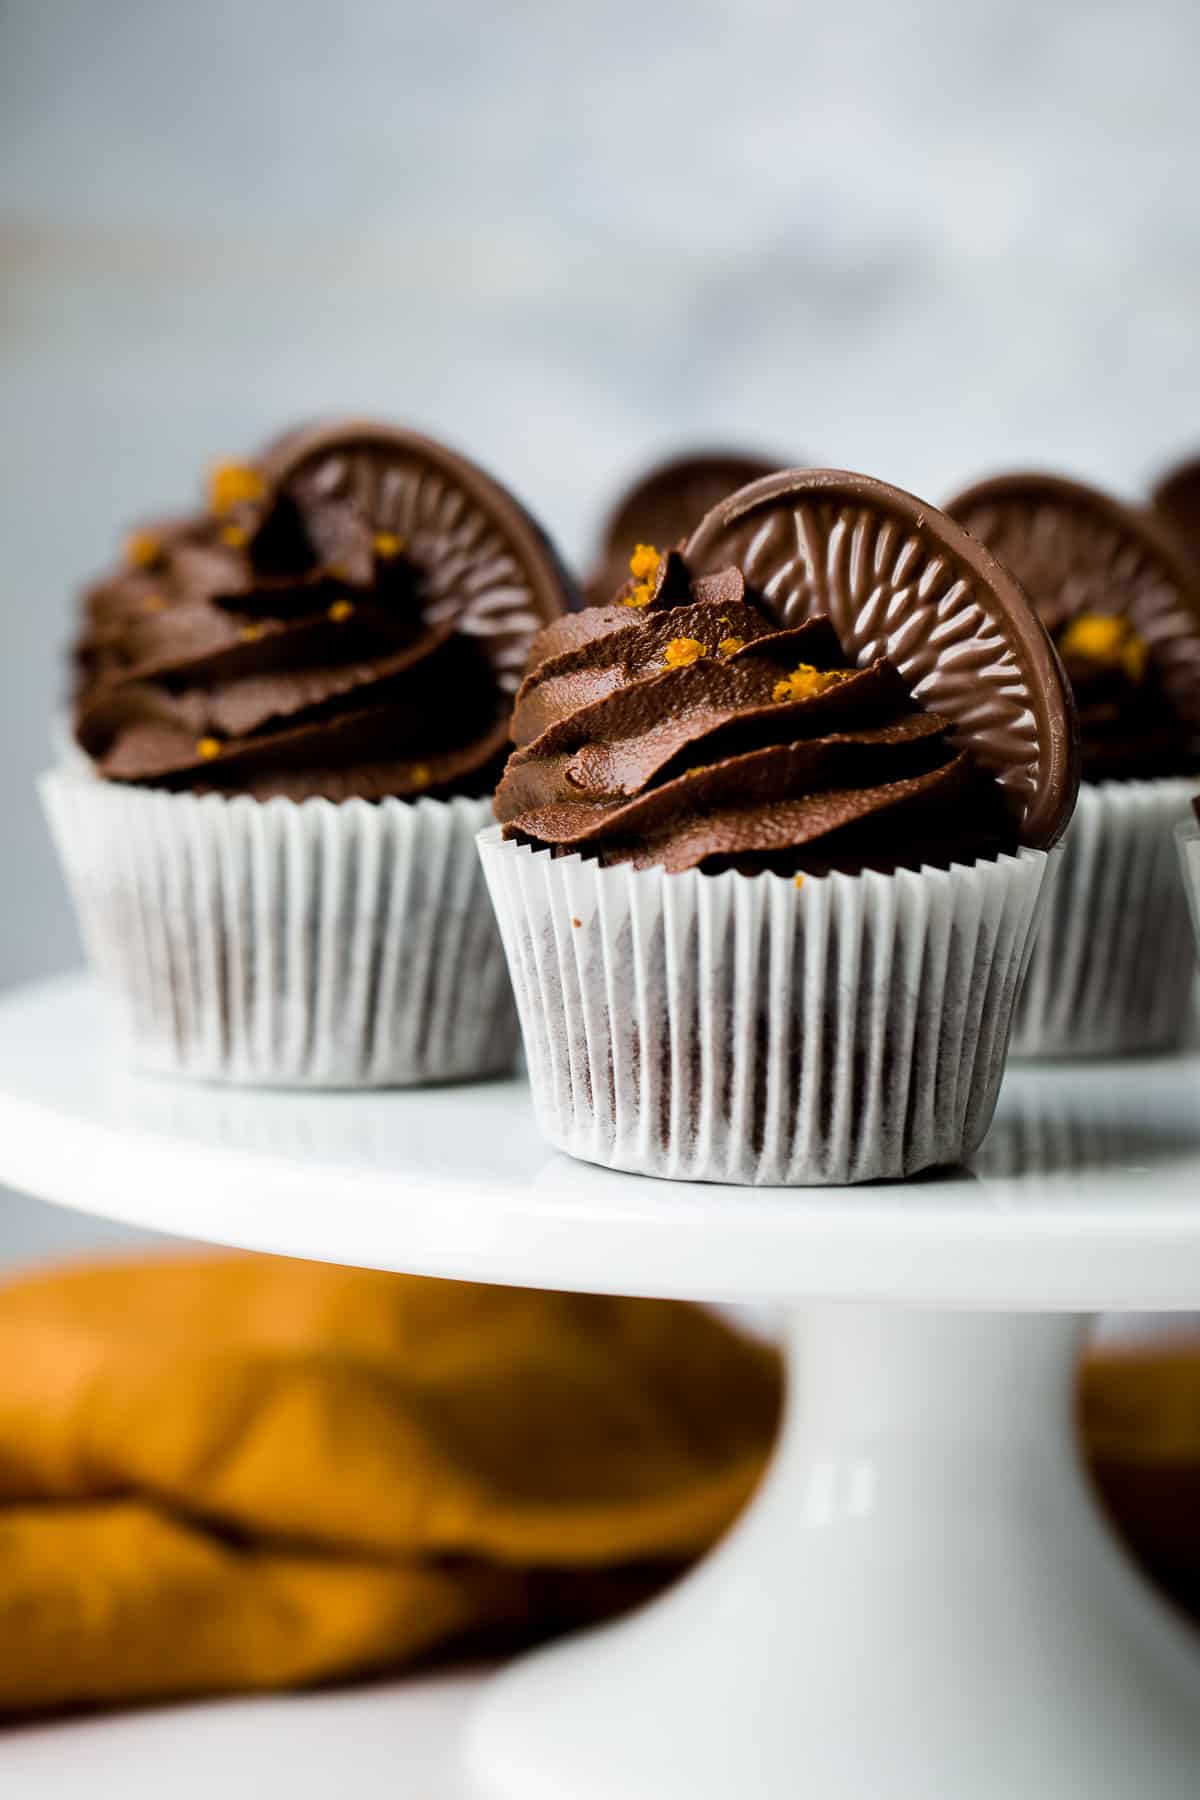 Chocolate cupcakes made with orange zest and juice. 